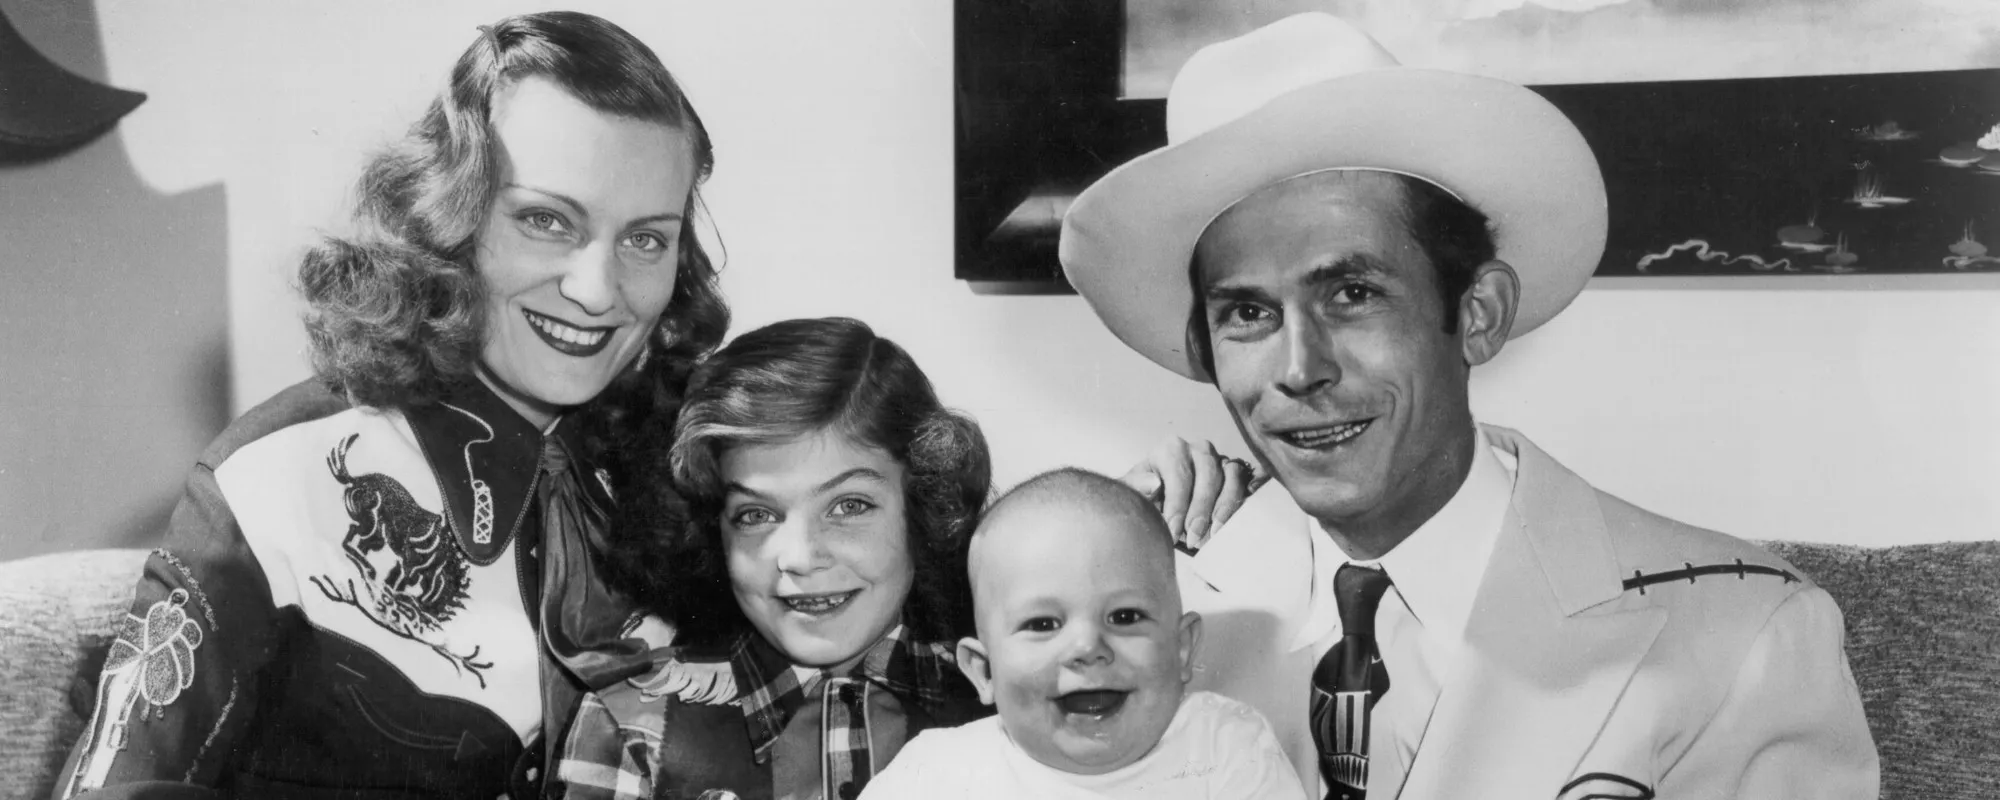 5 Fascinating Facts About Country Legend Hank Williams